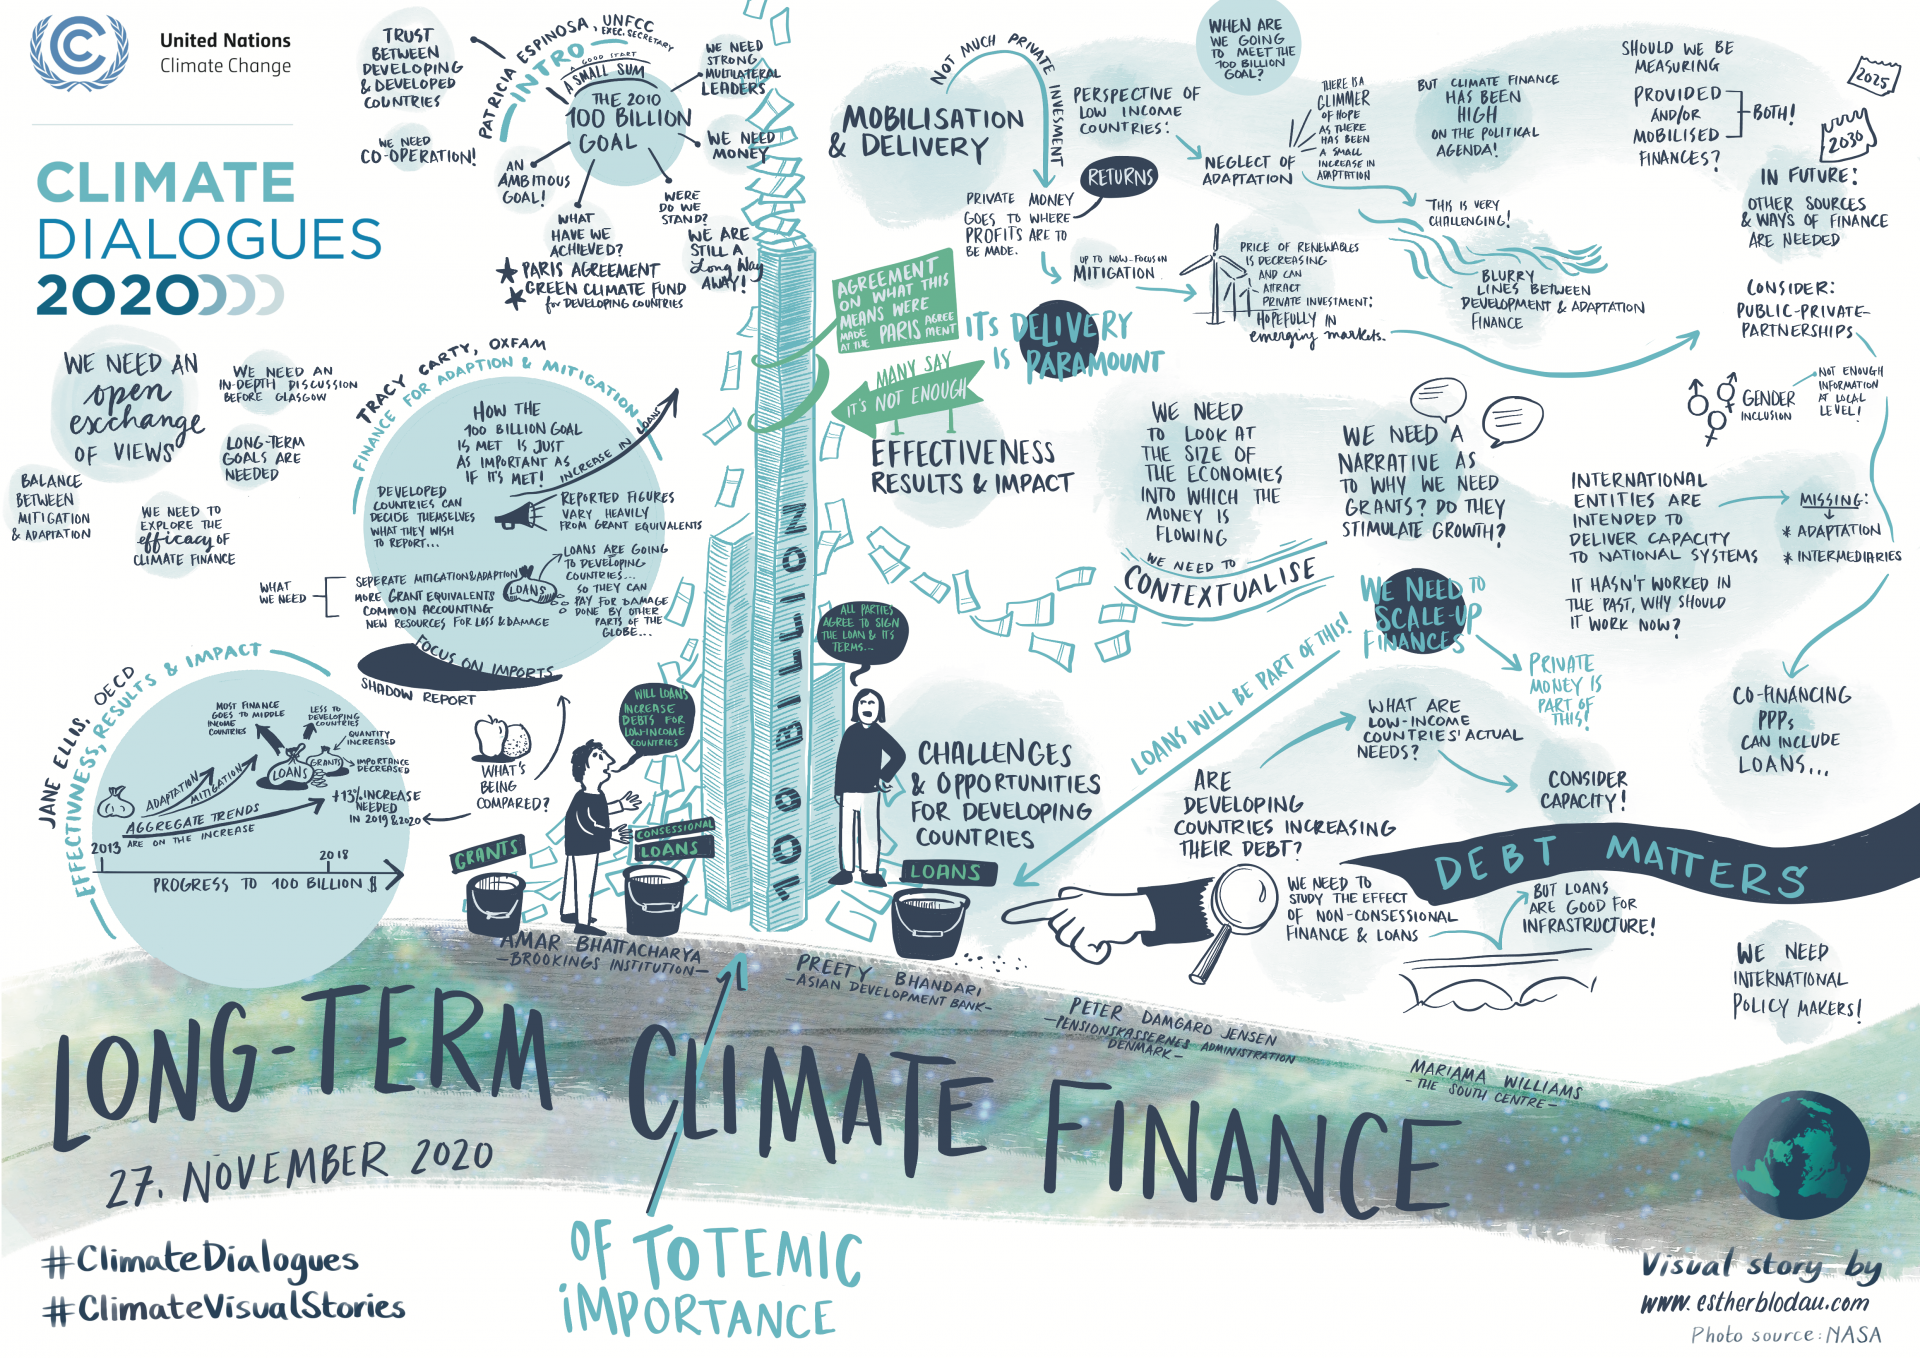 In-session workshop on long-term climate finance (Part I)